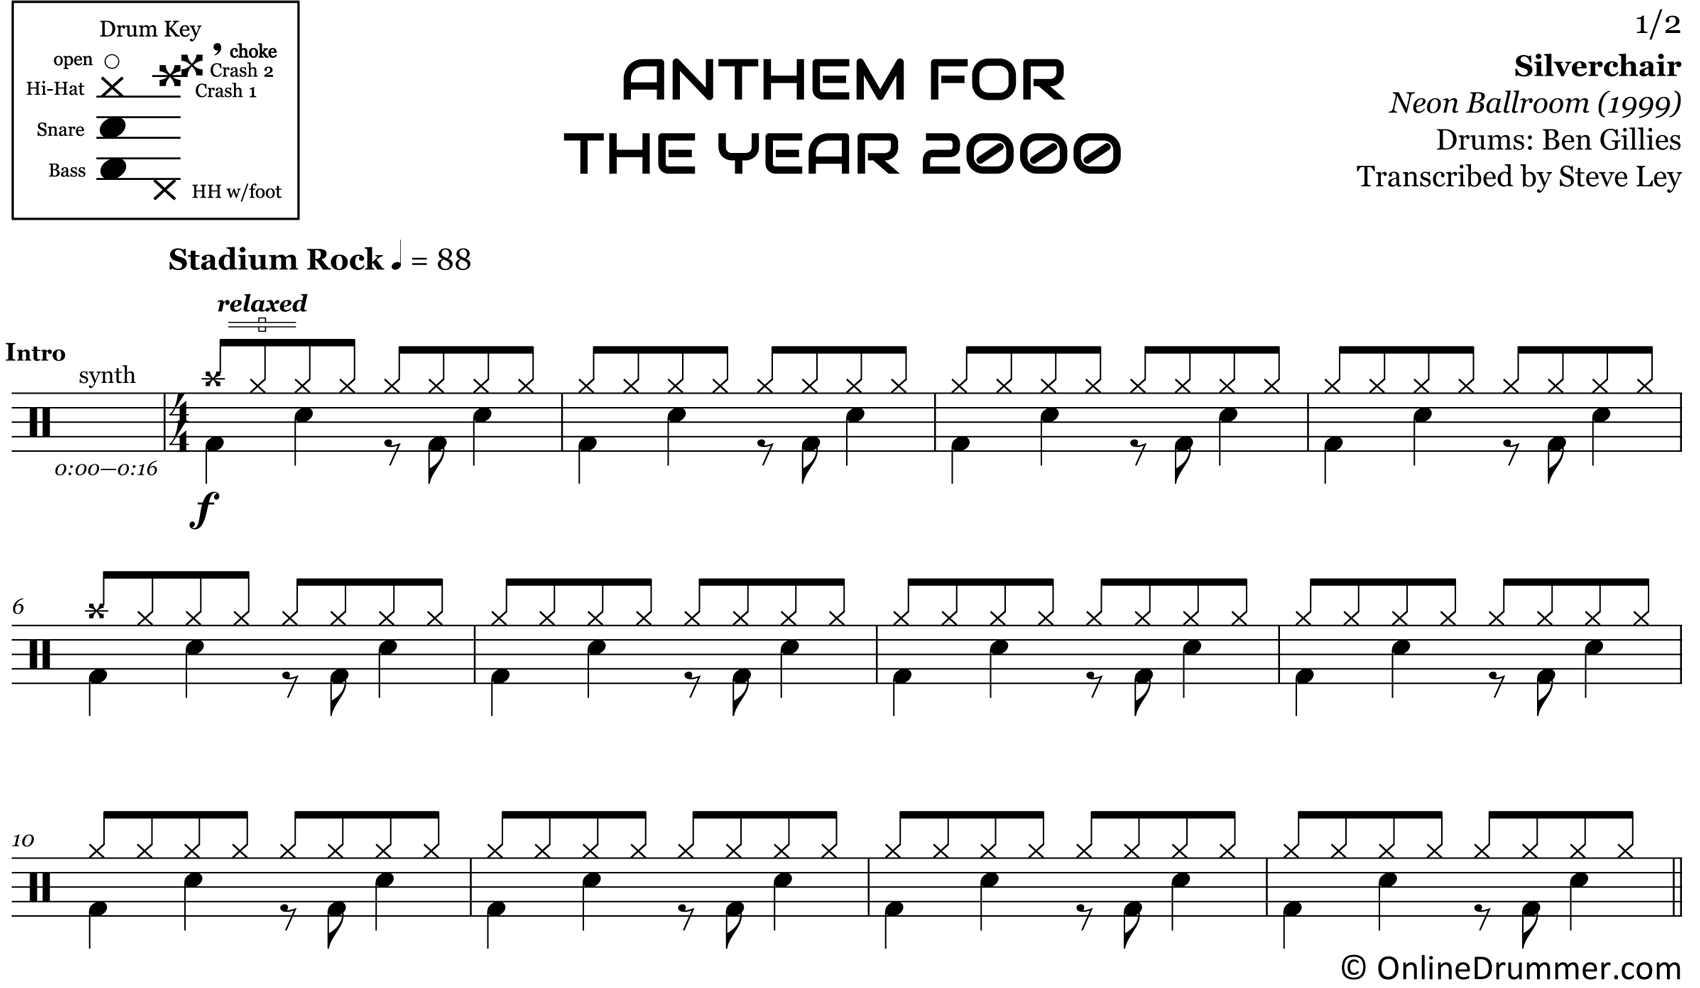 Anthem for the Year 2000 - Silverchair - Drum Sheet Music